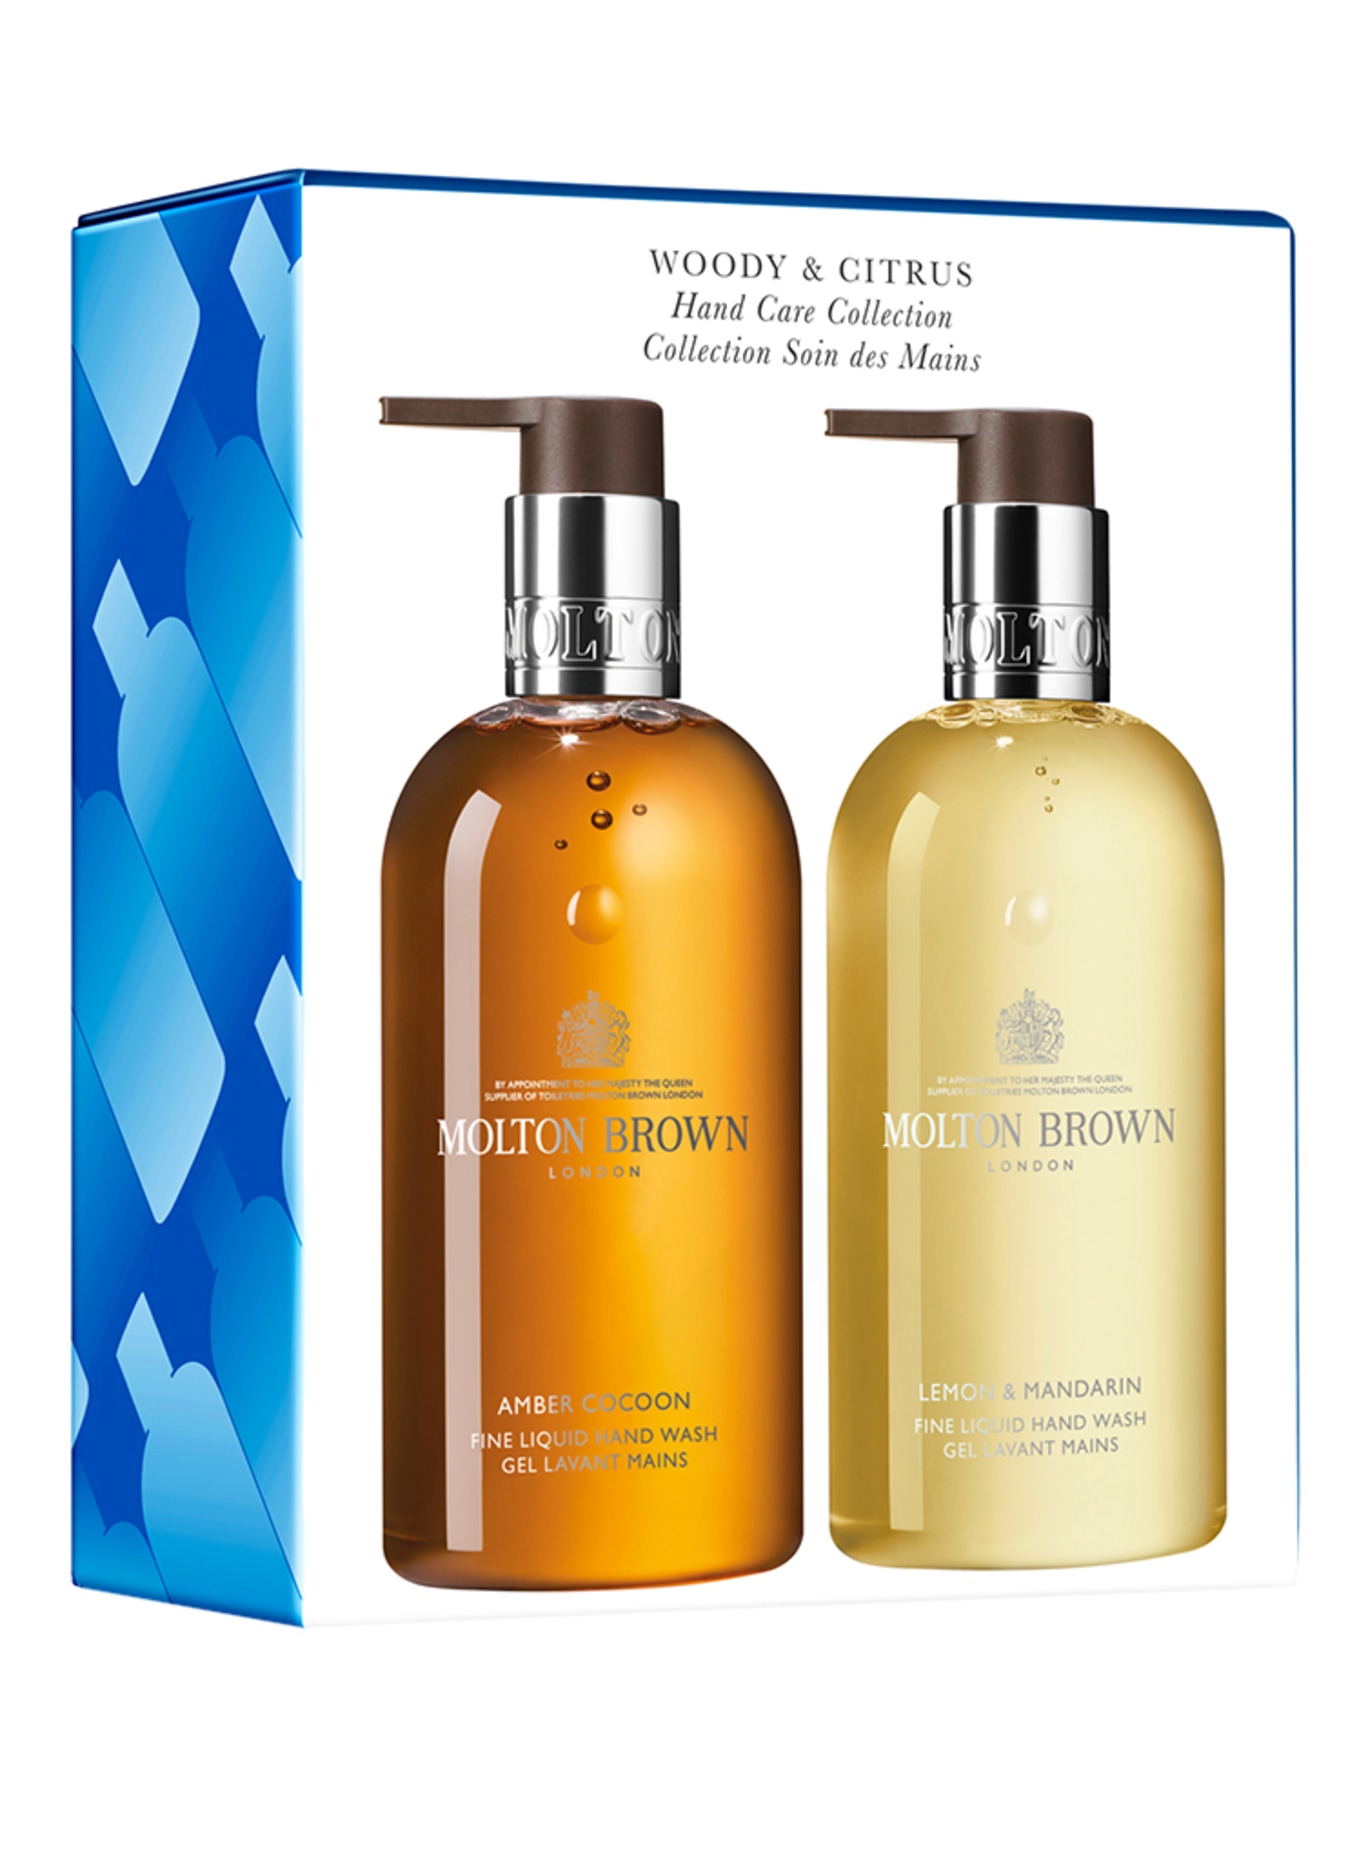 MOLTON BROWN WOODY & CITRUS HAND CARE COLLECTION (Obrázek 1)